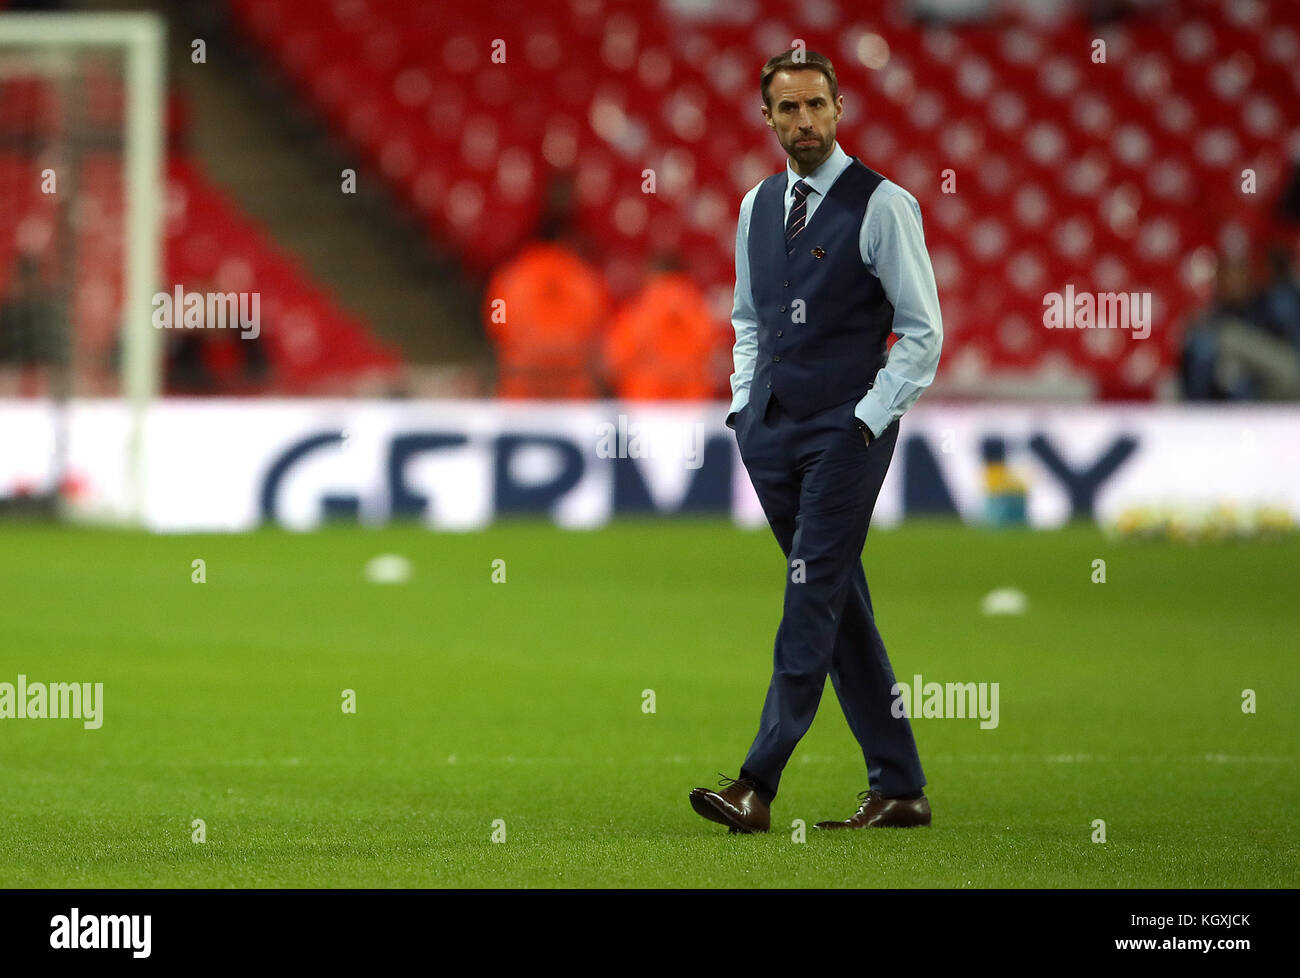 England manager Gareth Southgate inspects the pitch prior to the International Friendly match at Wembley Stadium, London. PRESS ASSOCIATION Photo. Picture date: Friday November 10, 2017. See PA story SOCCER England. Photo credit should read: Nick Potts/PA Wire. Stock Photo